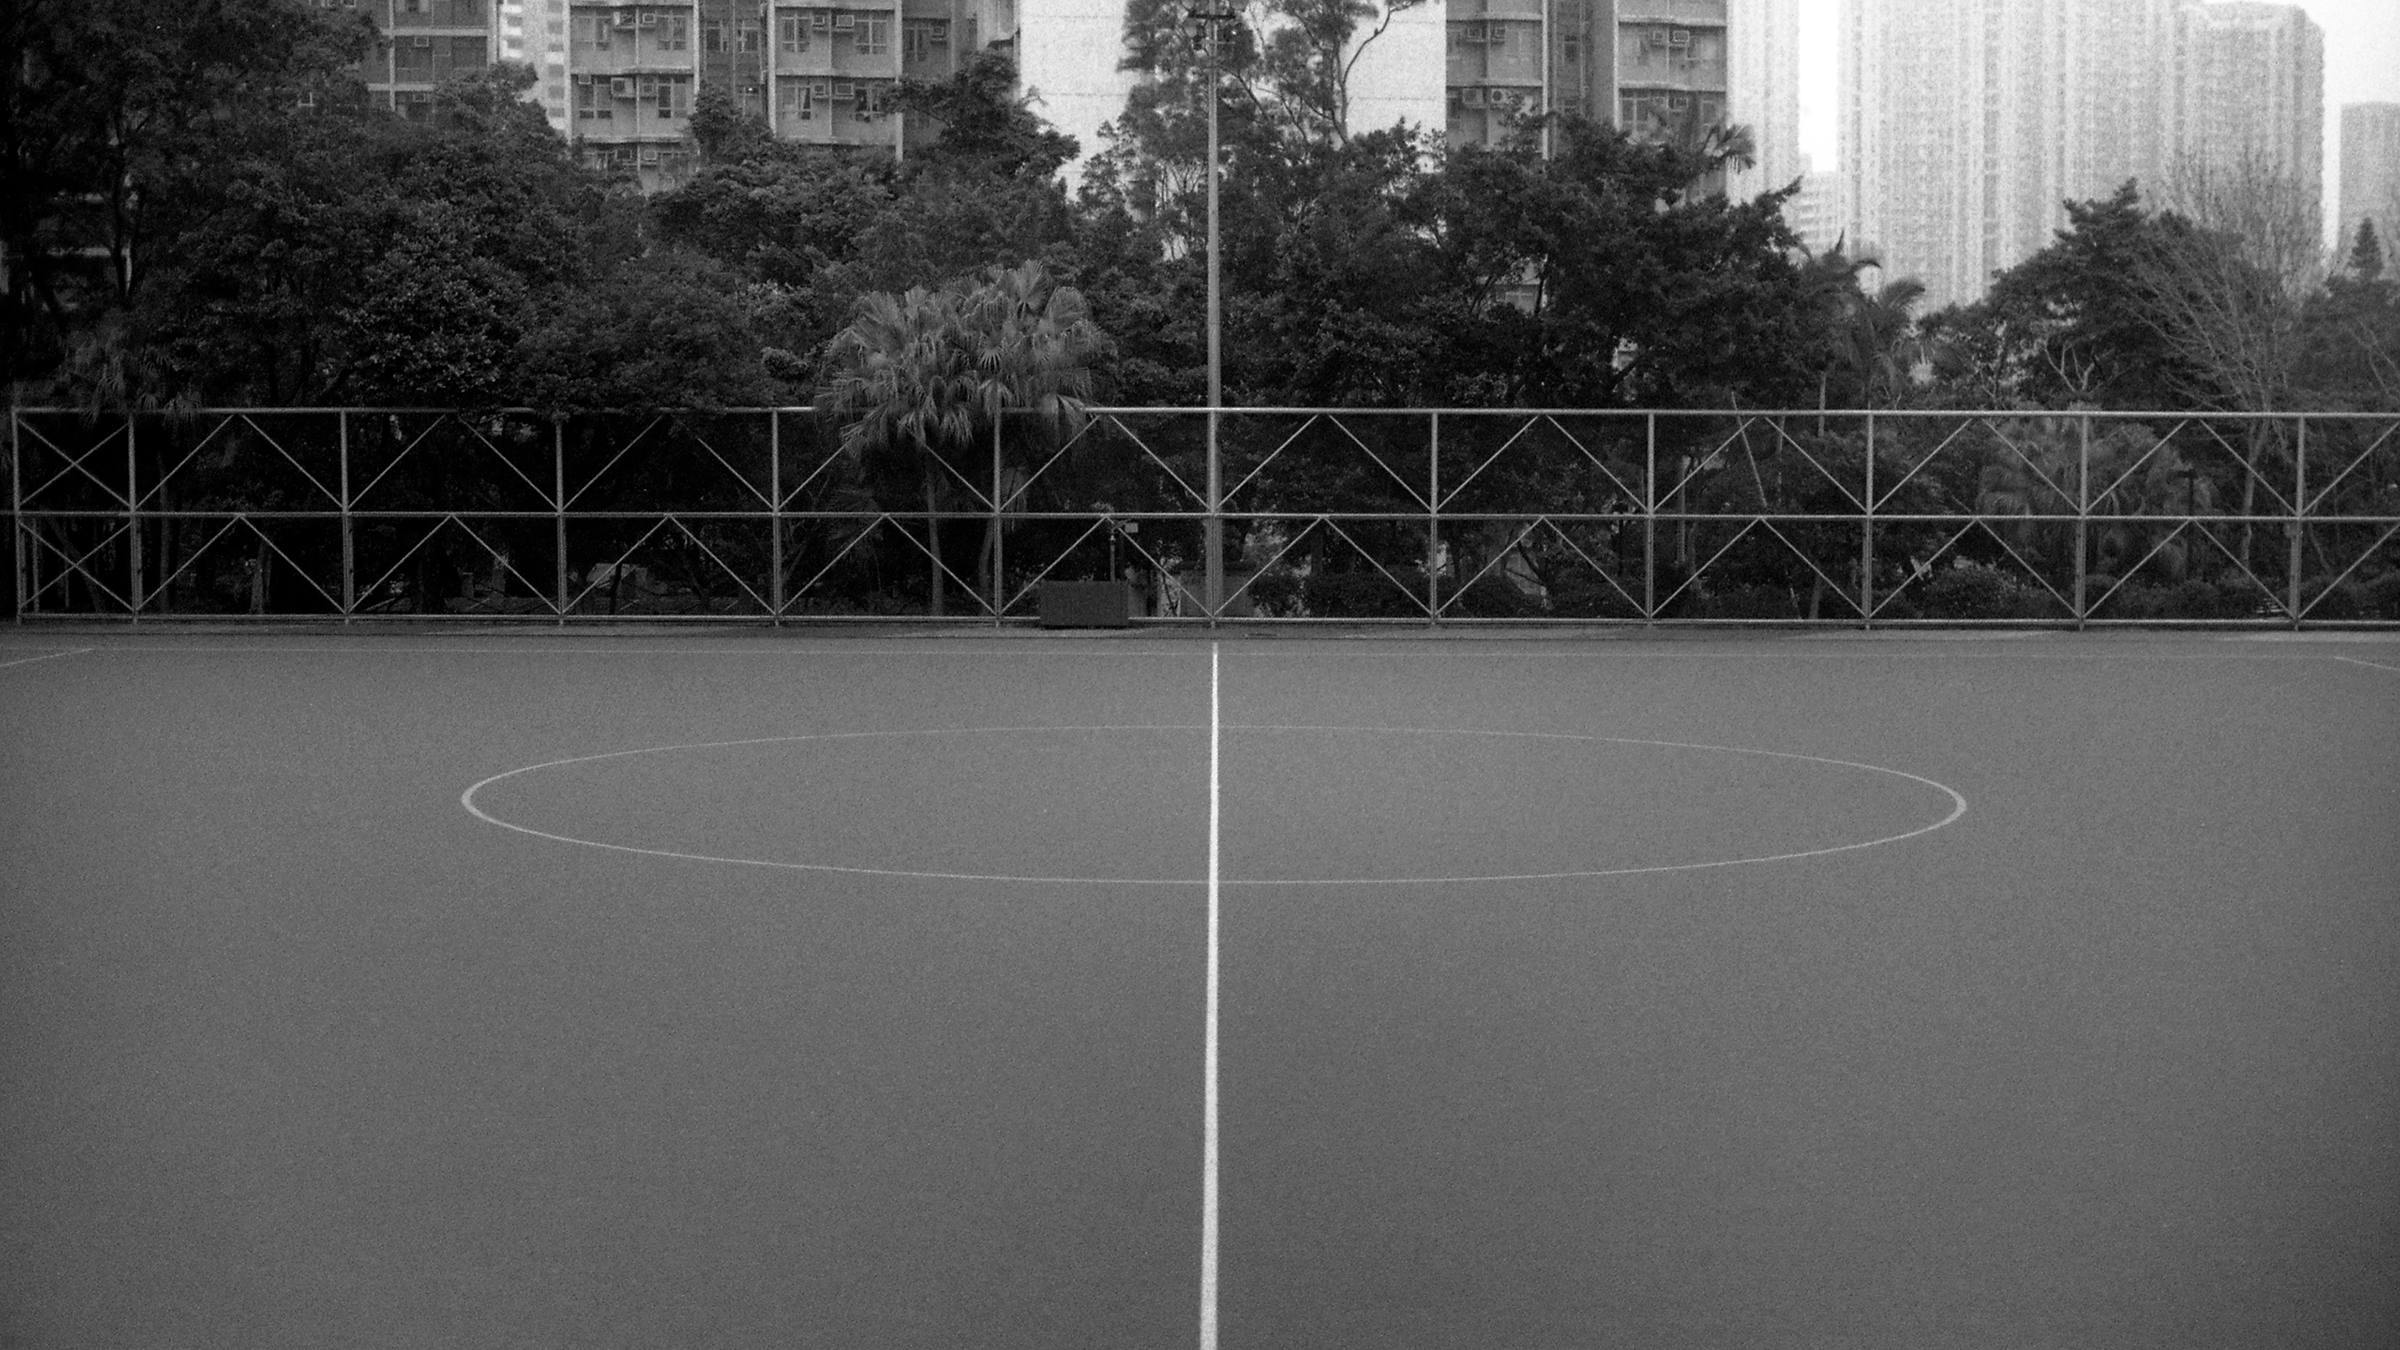 Black and white image of a sports court with white lines on the floor. In the background, there are trees and some apartment buildings.